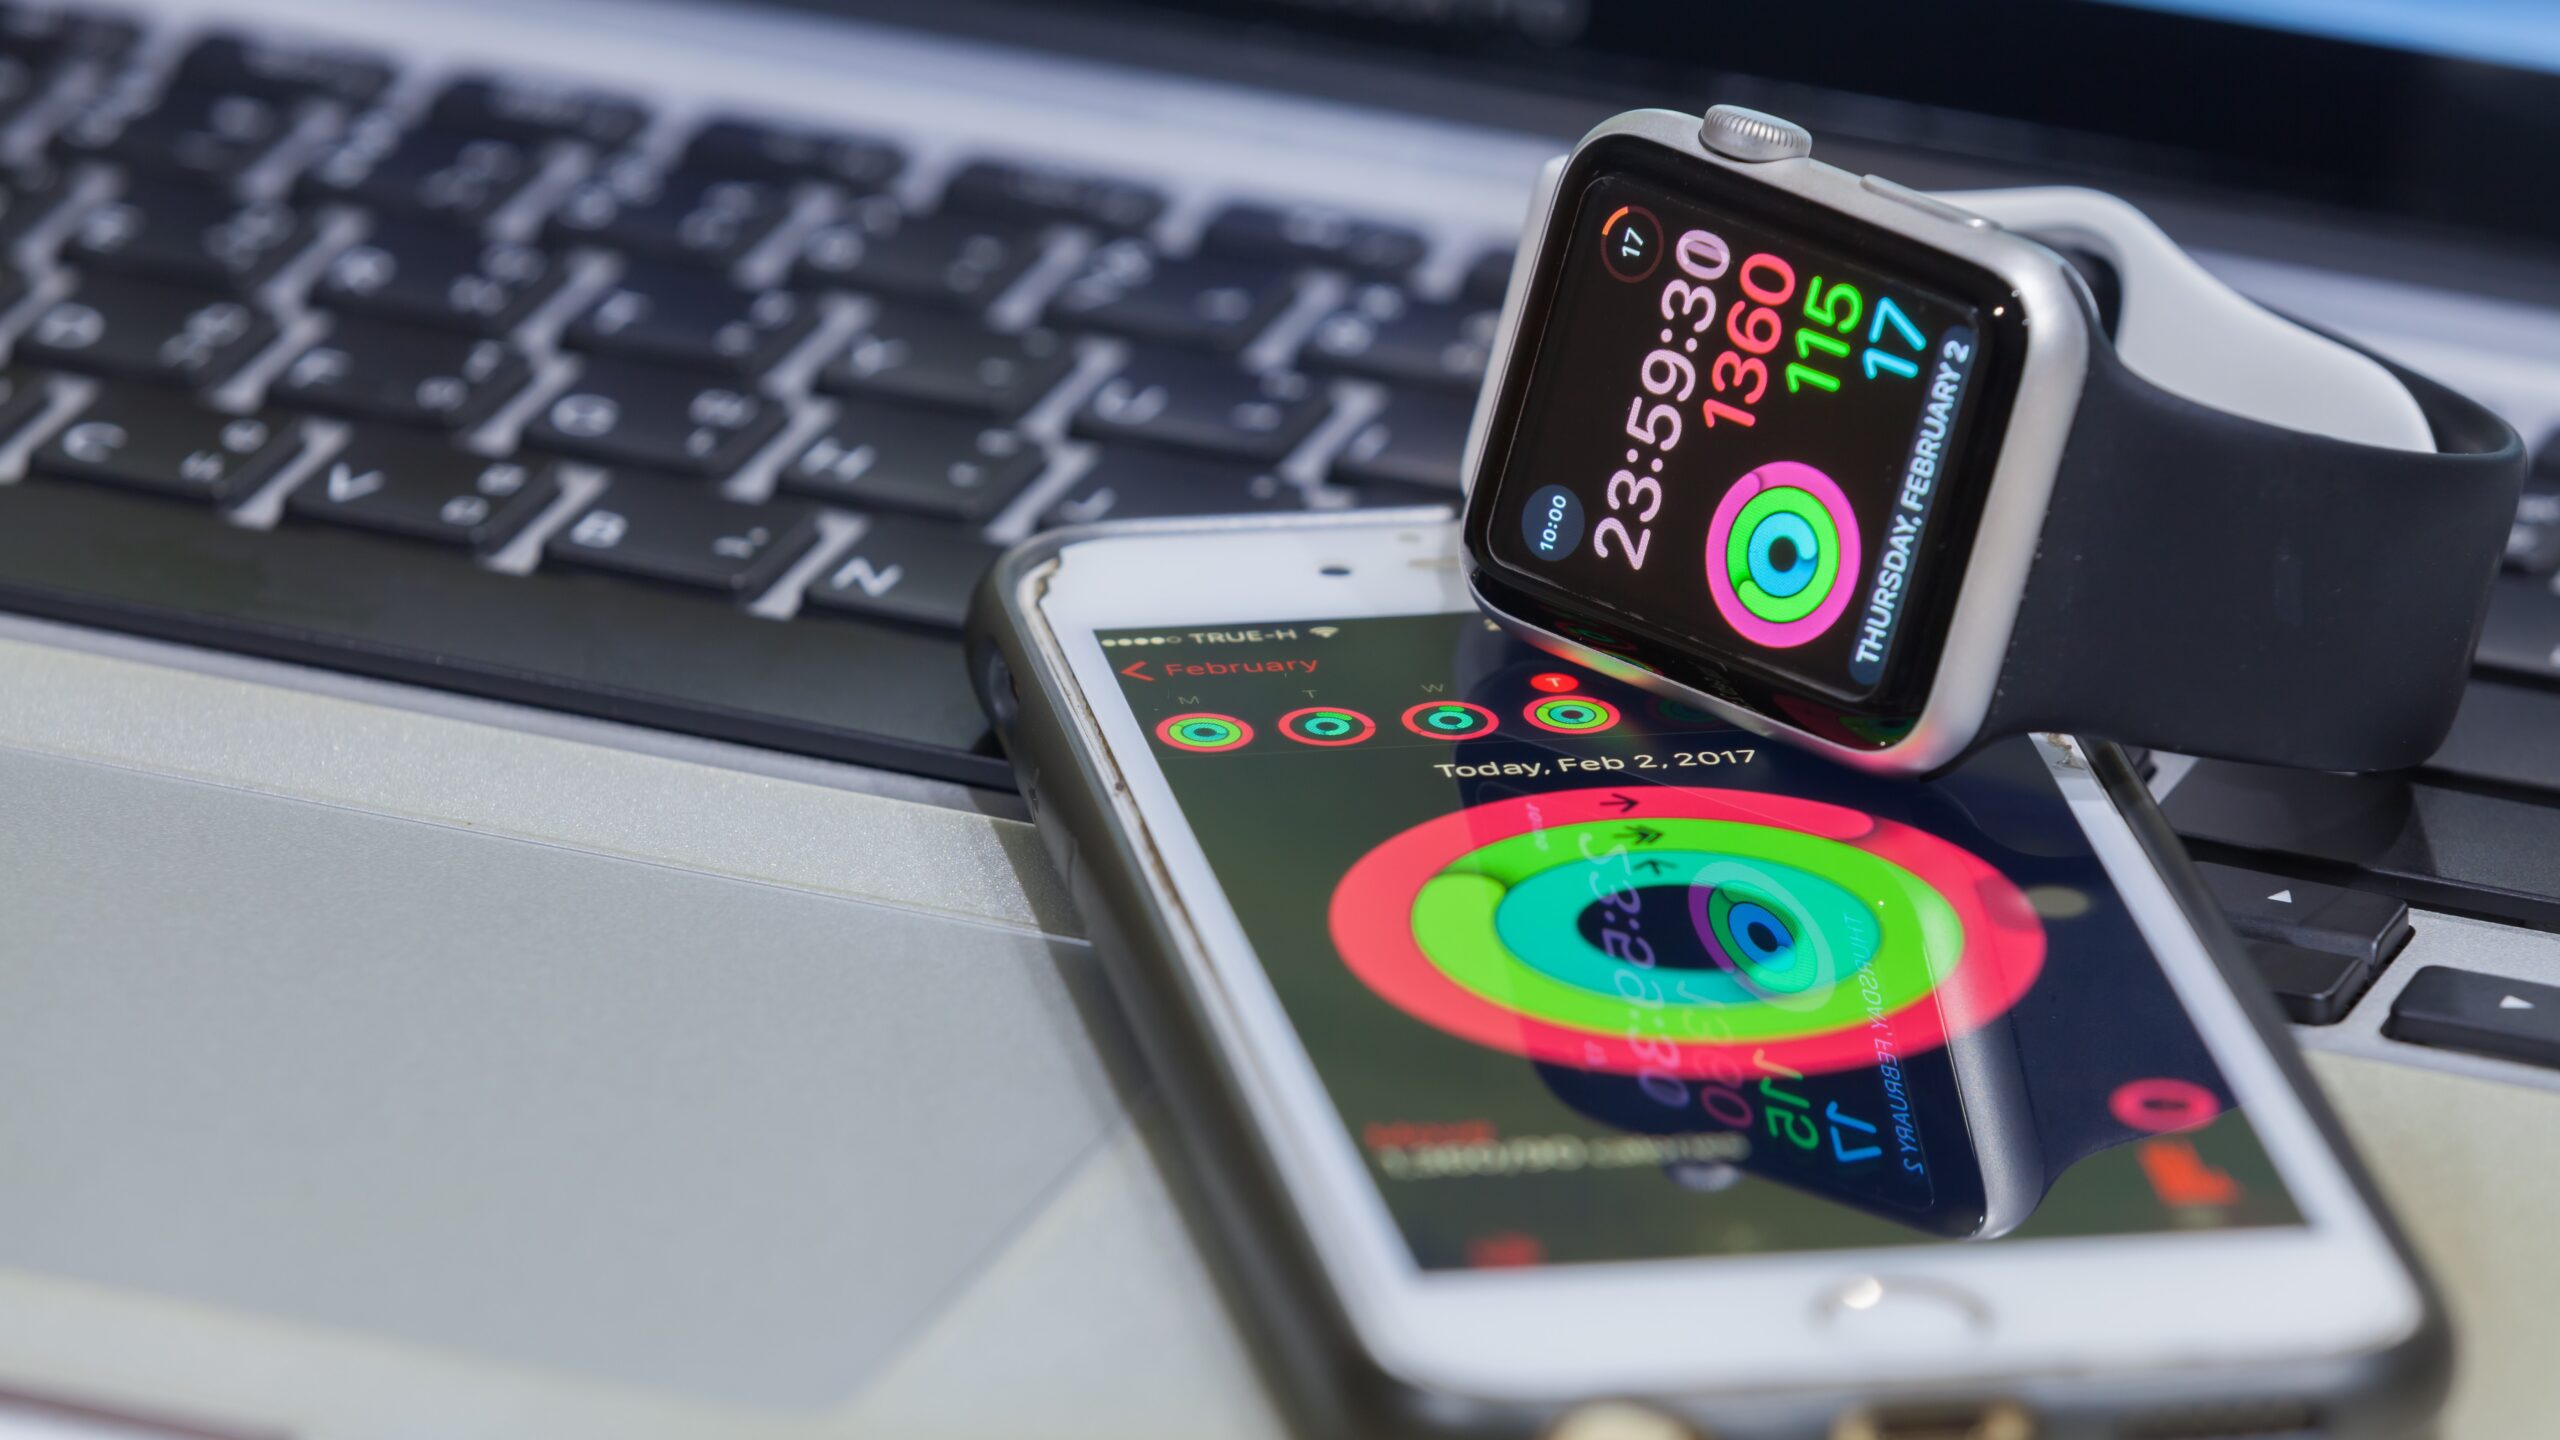 Not planning on working out? watchOS 11 has you covered with custom activity goals